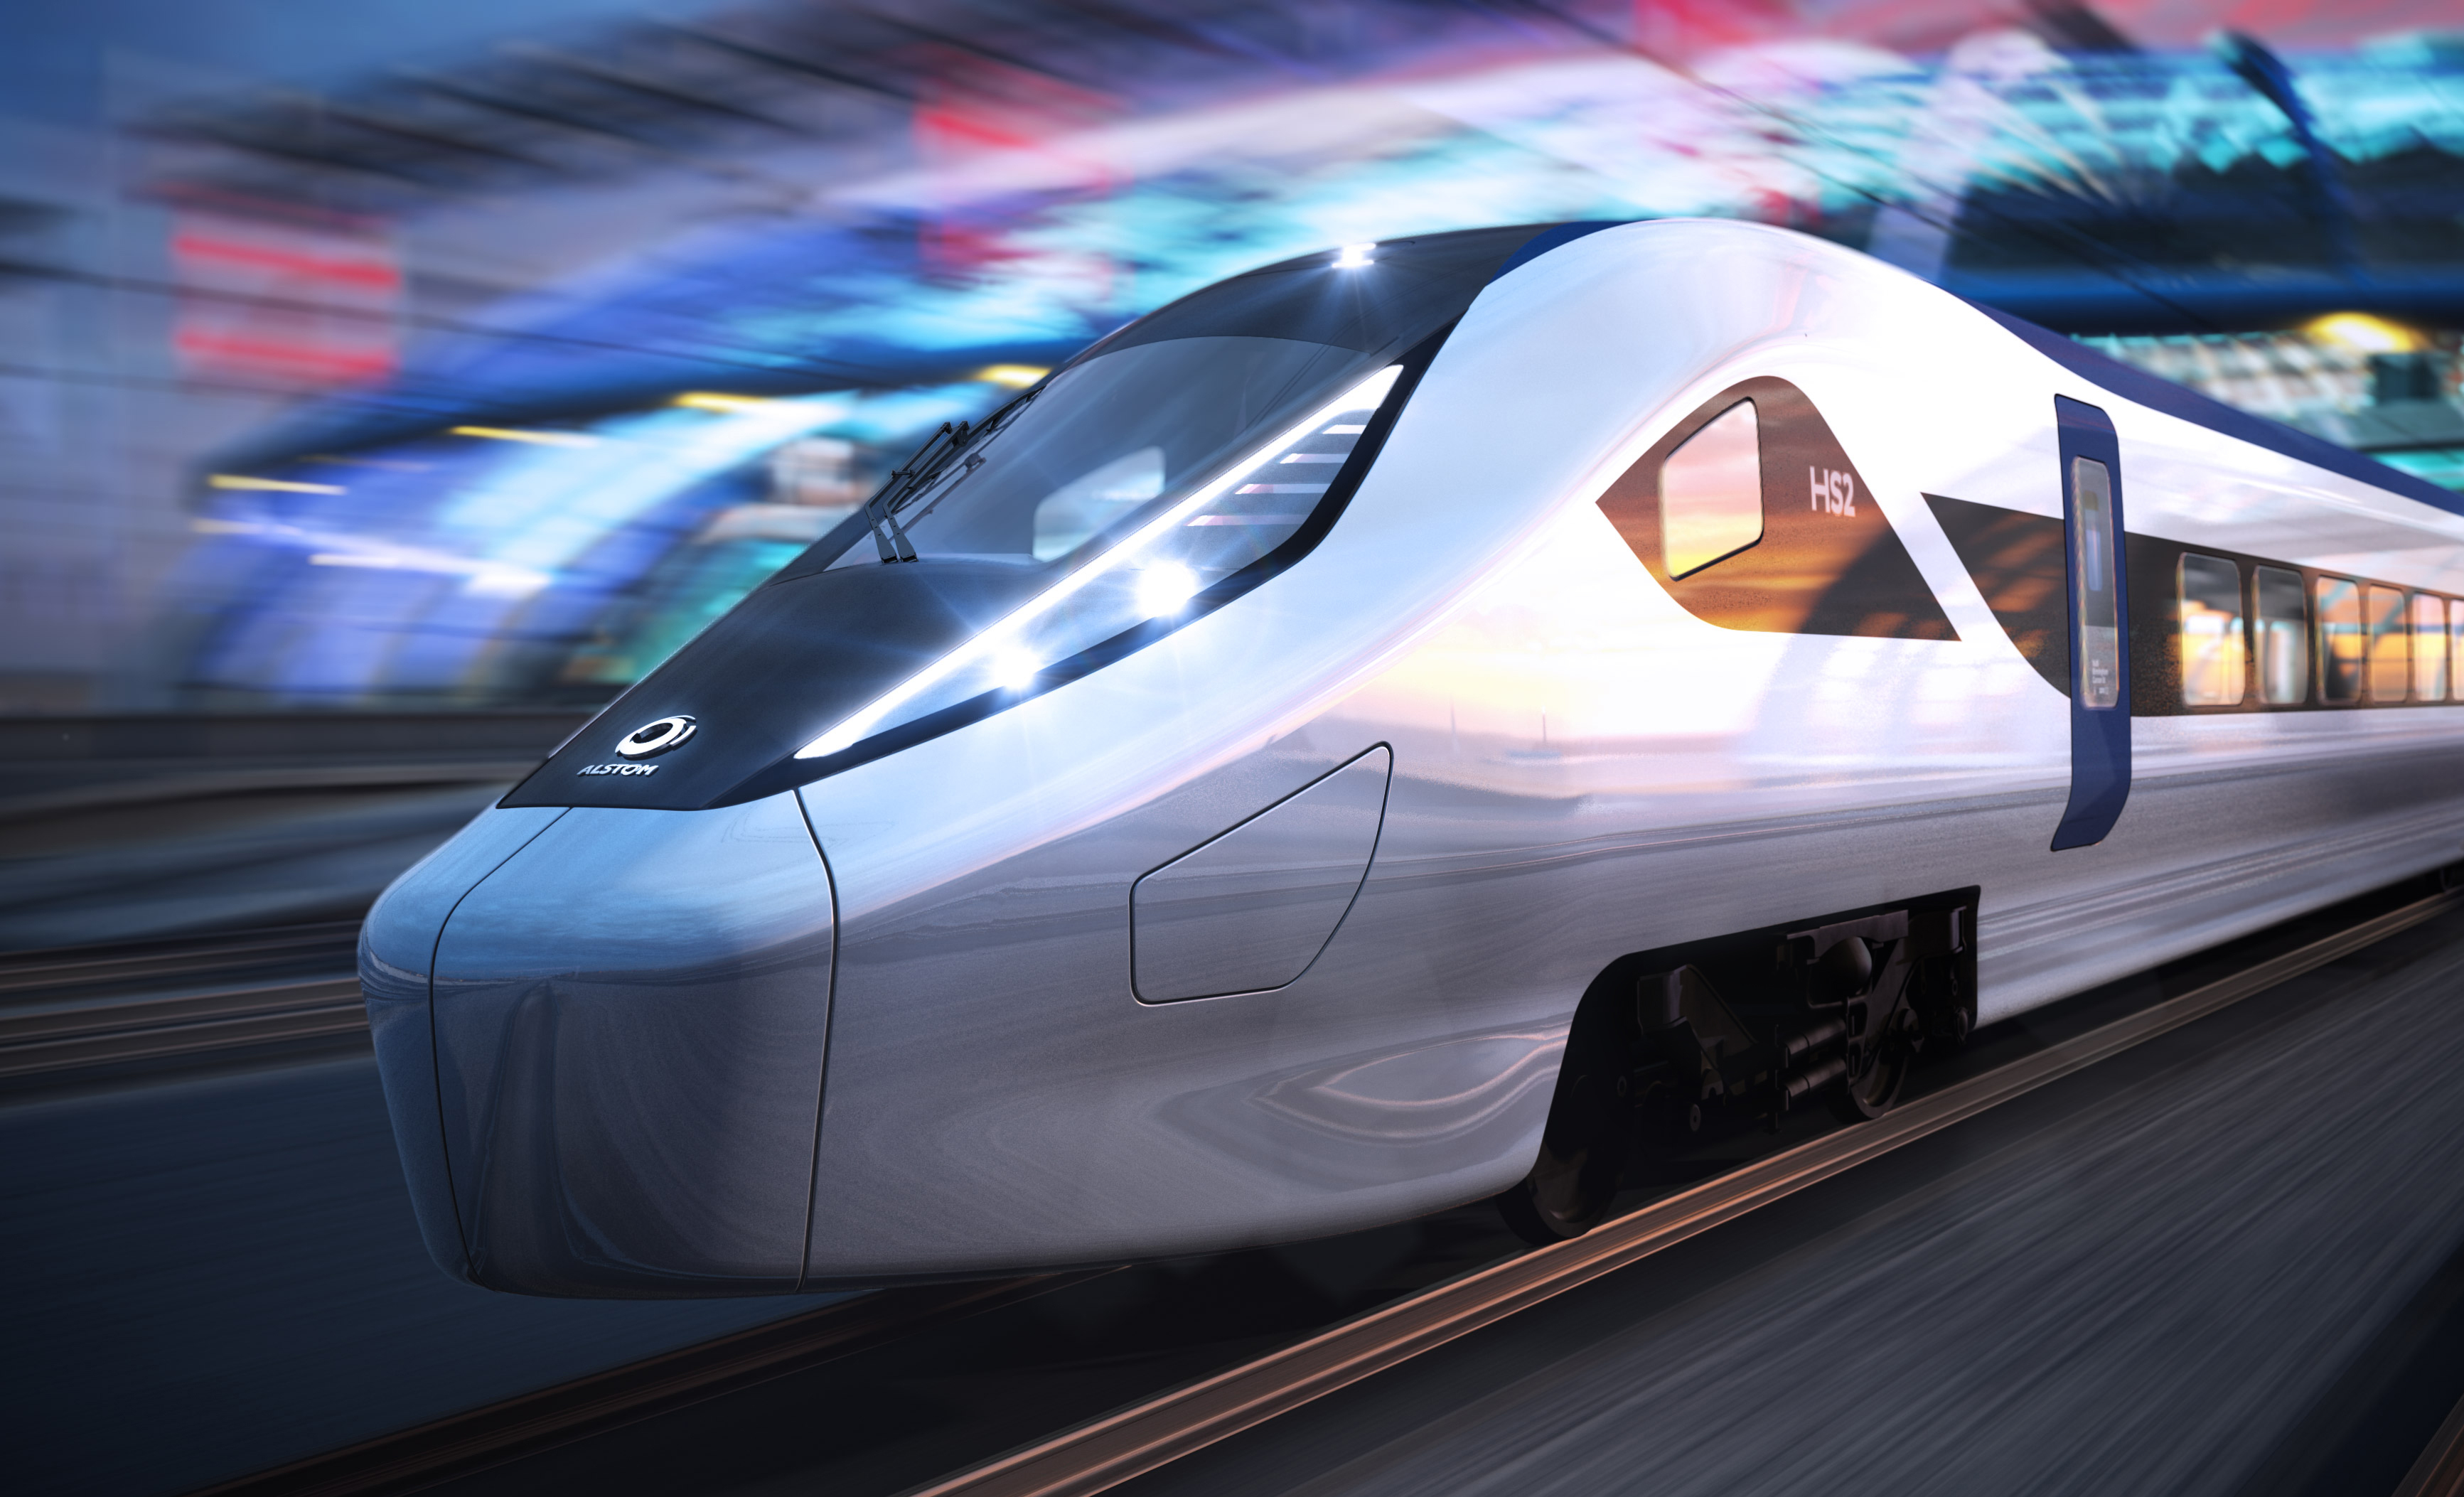 Alstom says its HS2 trains would be 'world class, modern and flexible' (Alstom Design & Styling 2019/PA)